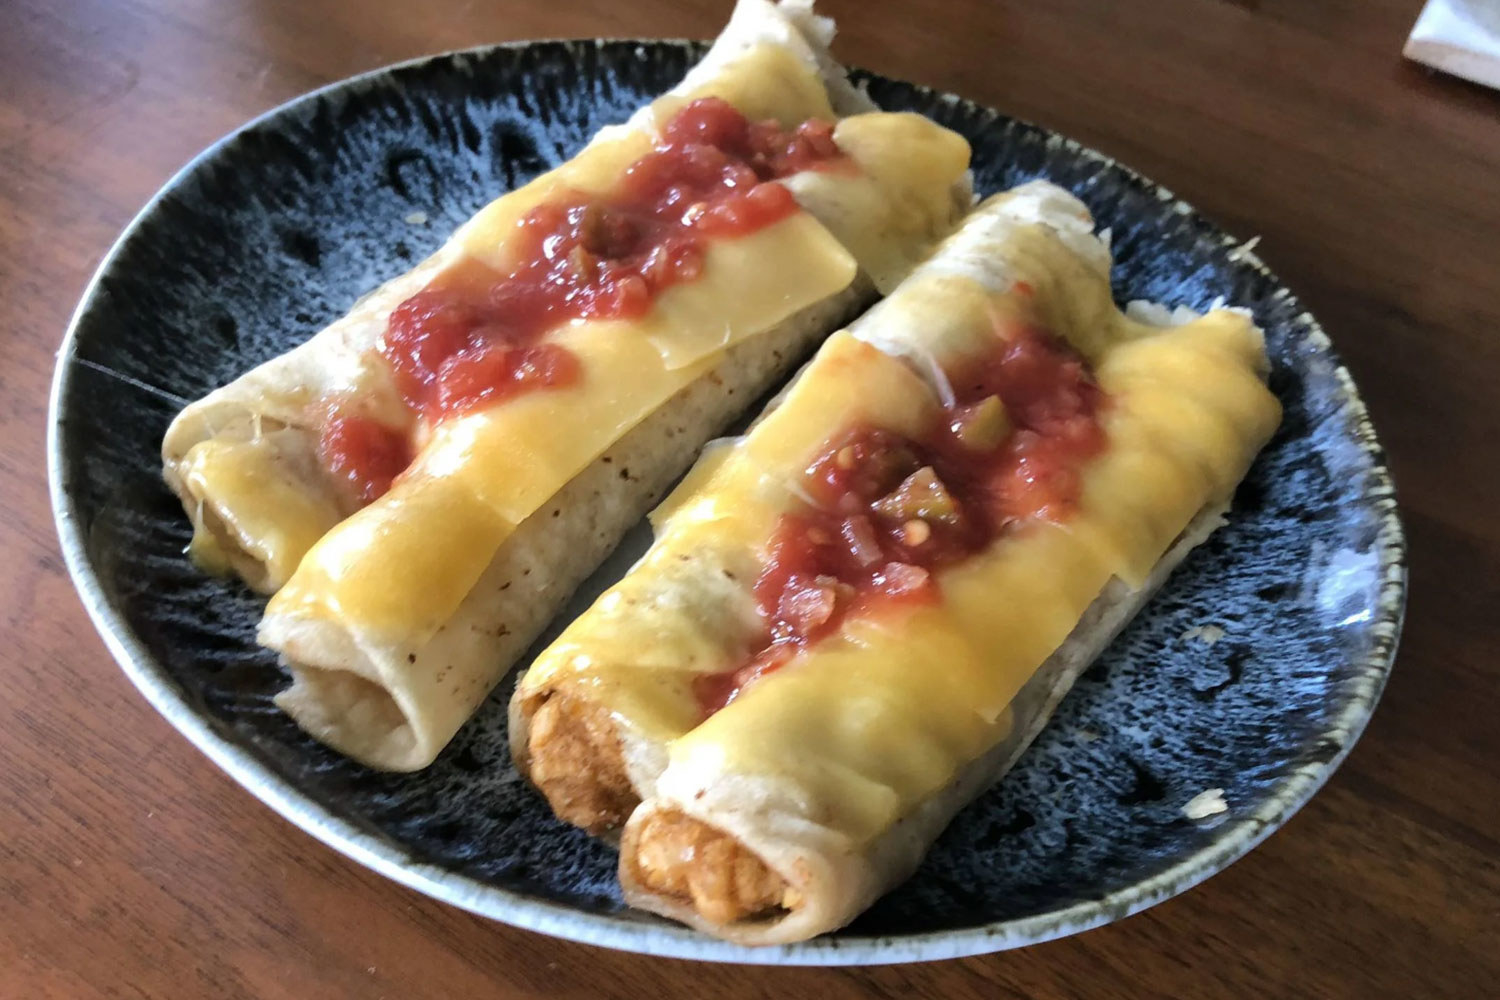 Taquitos topped with melted cheese and salsa